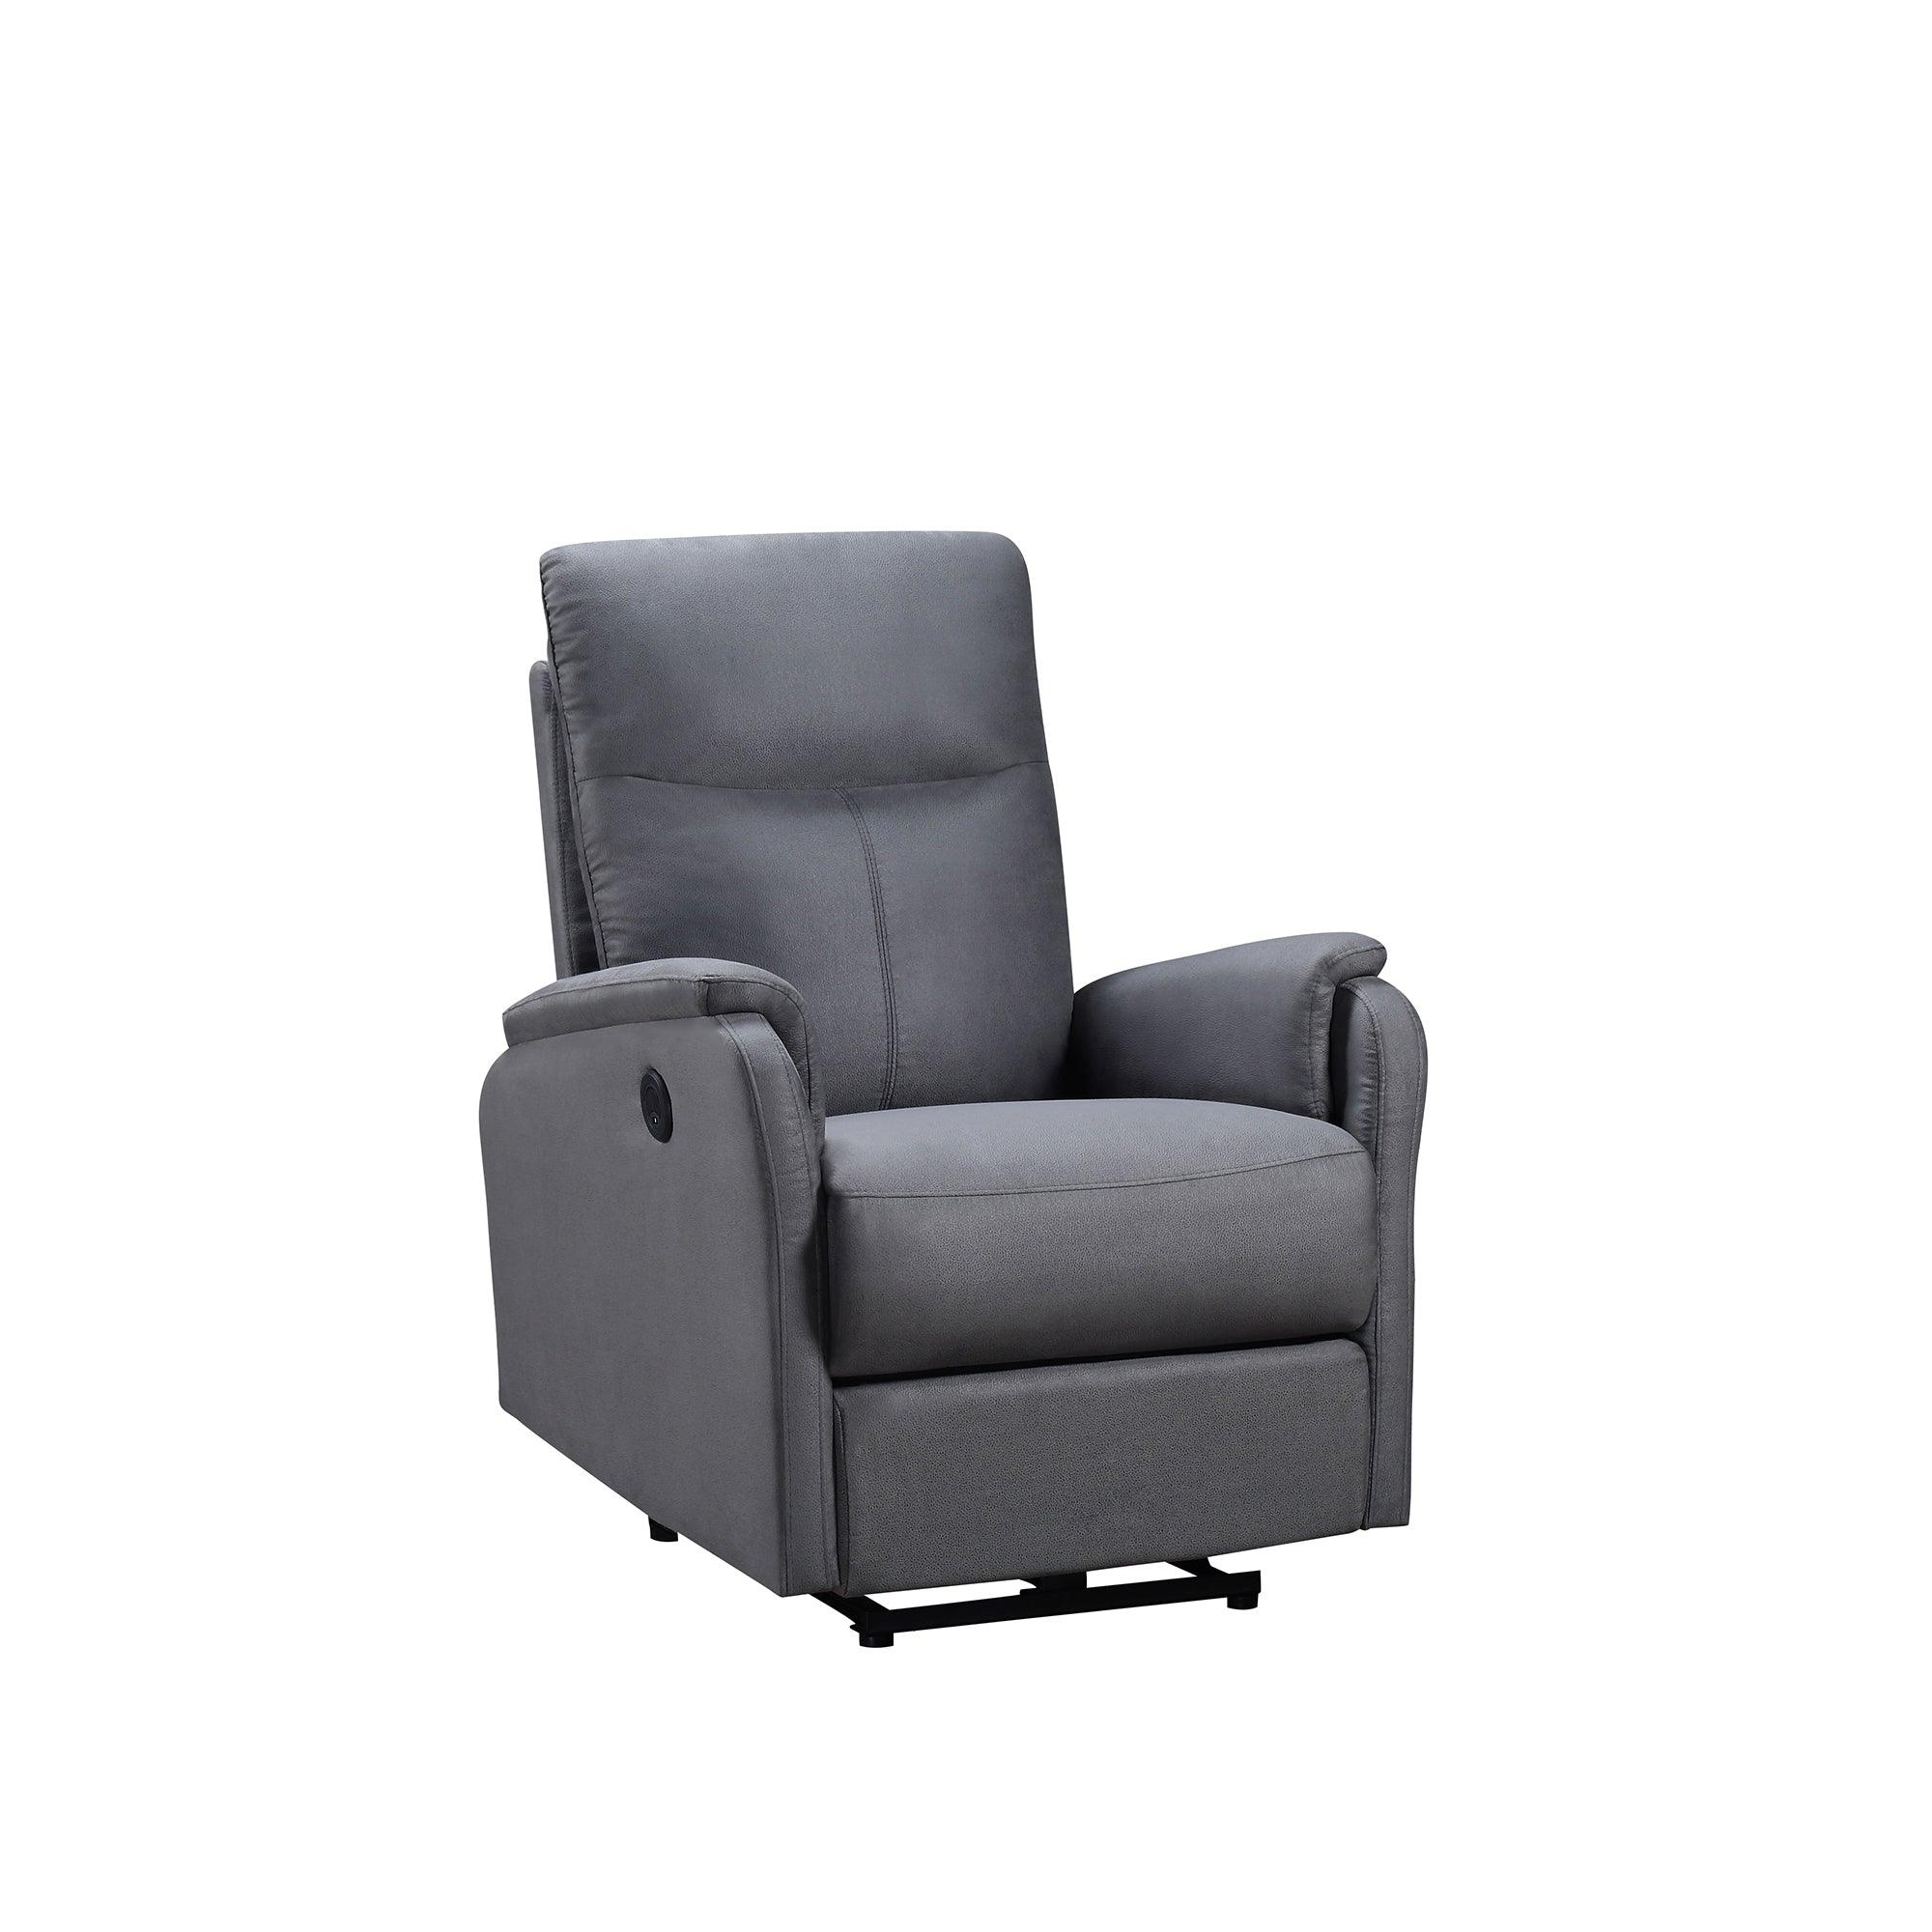 🆓🚛 Power Recliner Chair With Usb Charge Port, Recliner Single Chair for Living Room, Bed Room - Gray